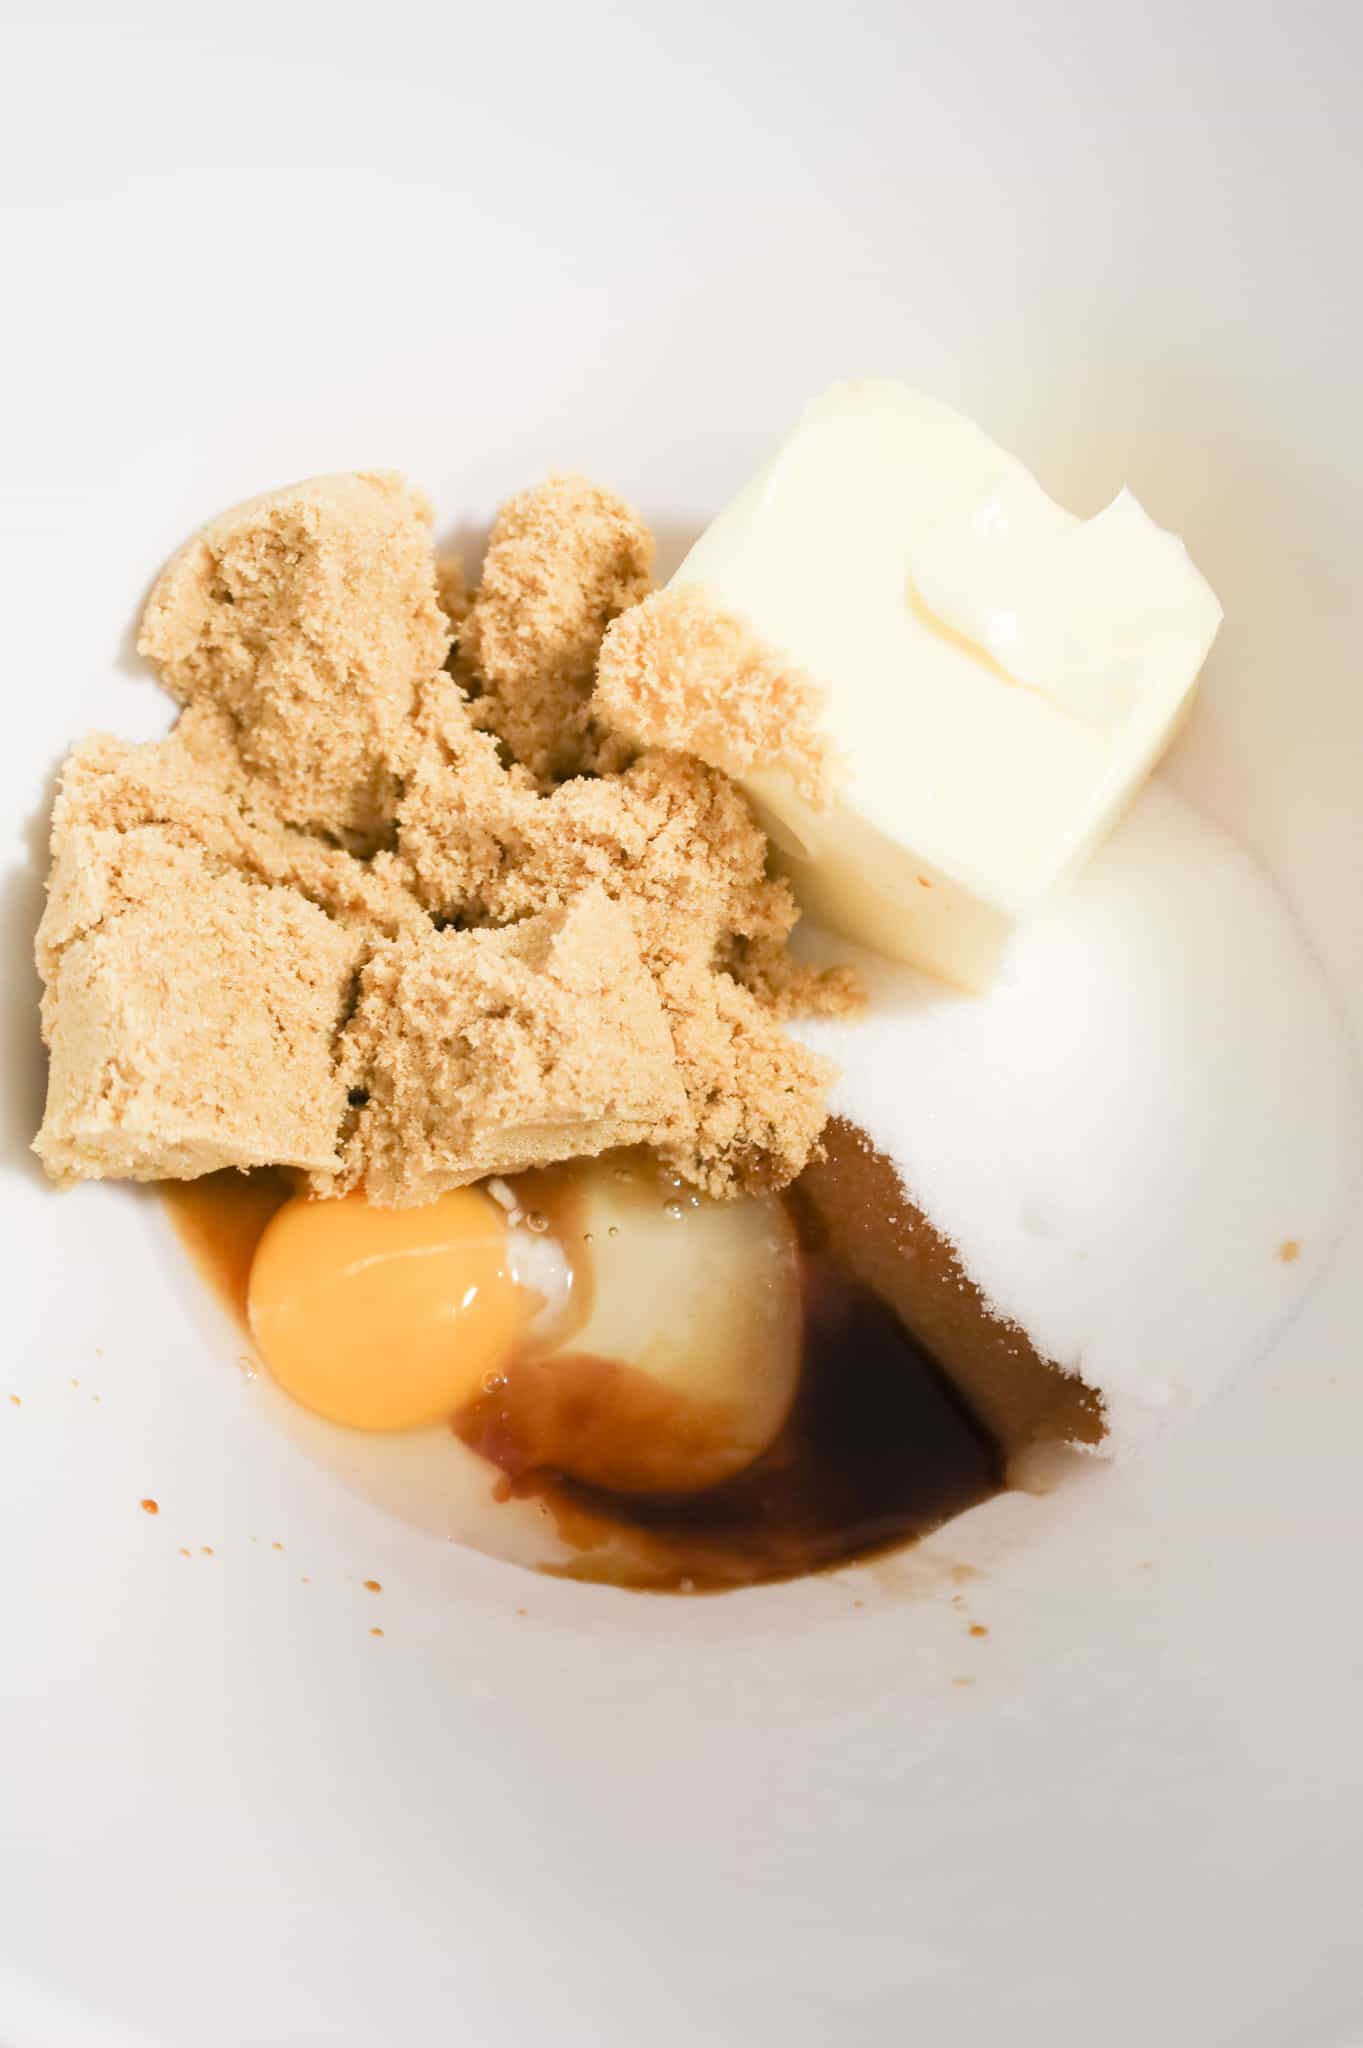 brown sugar, butter, granulated sugar, vanilla extract and an egg in a mixing bowl